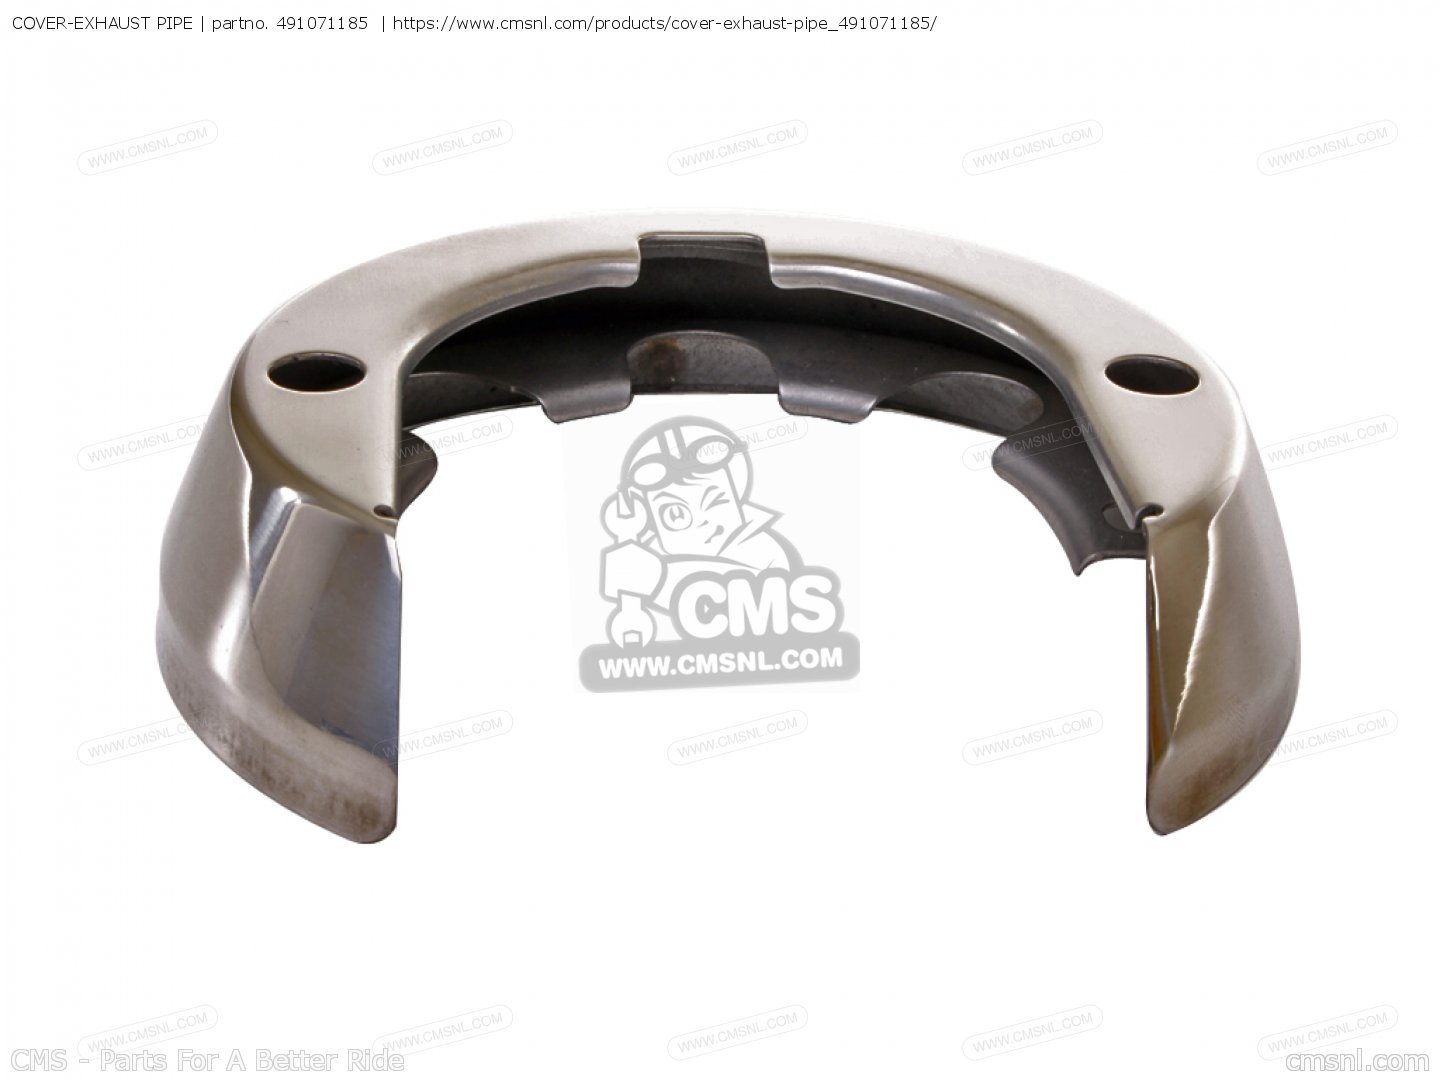 COVER-EXHAUST PIPE,EN for ZX1200B1 ZX12R 2002 USA CALIFORNIA 